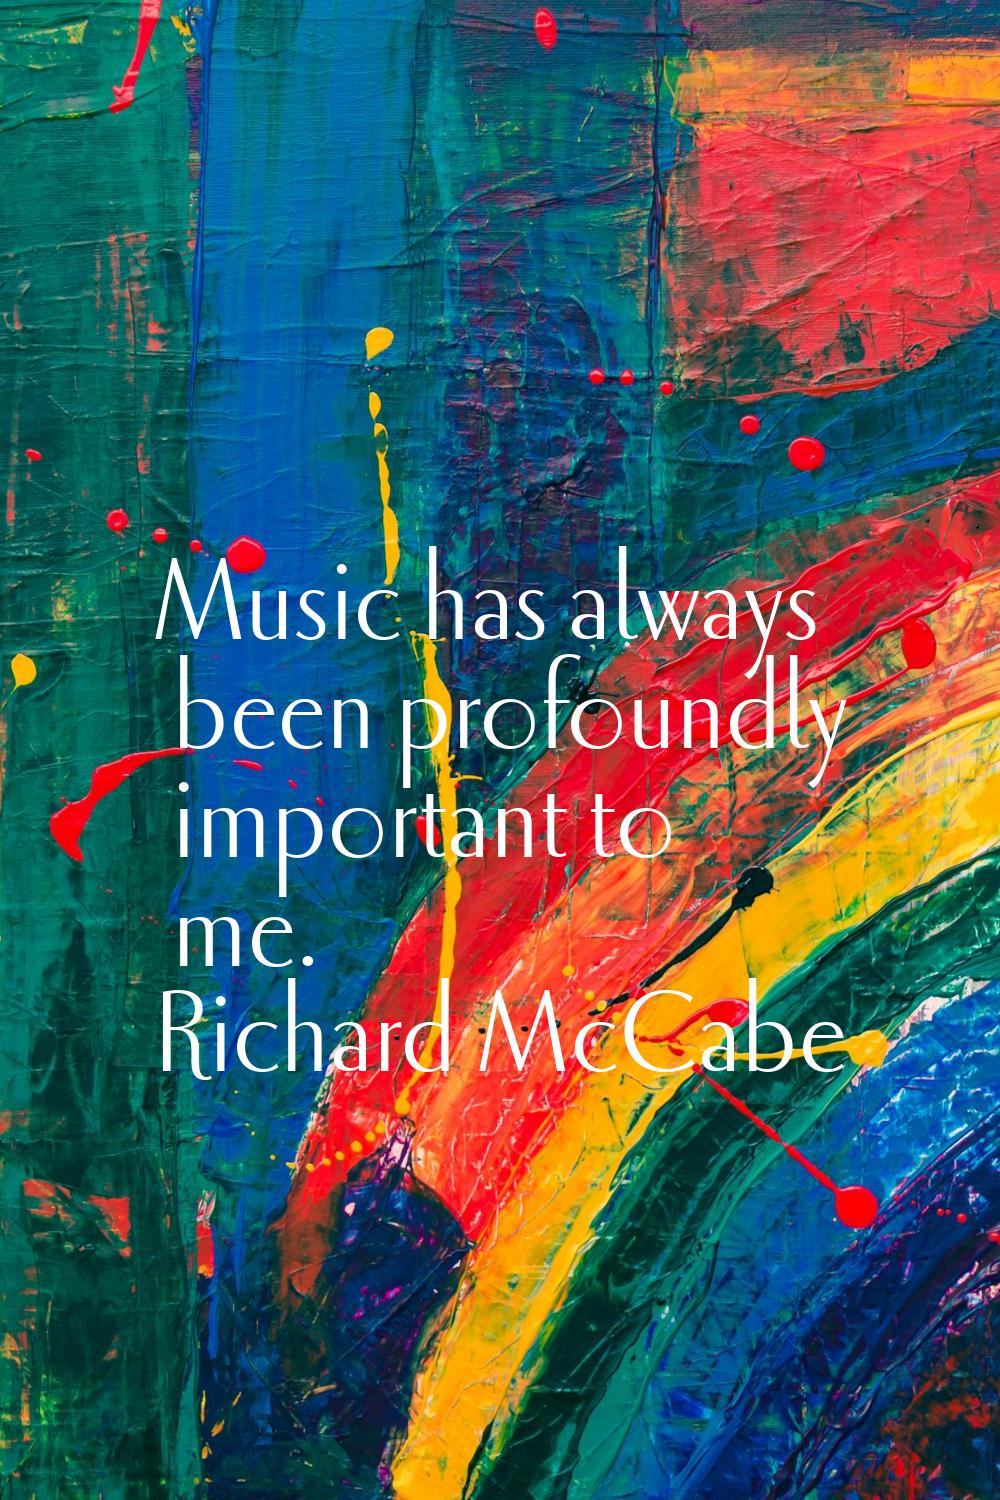 Music has always been profoundly important to me.